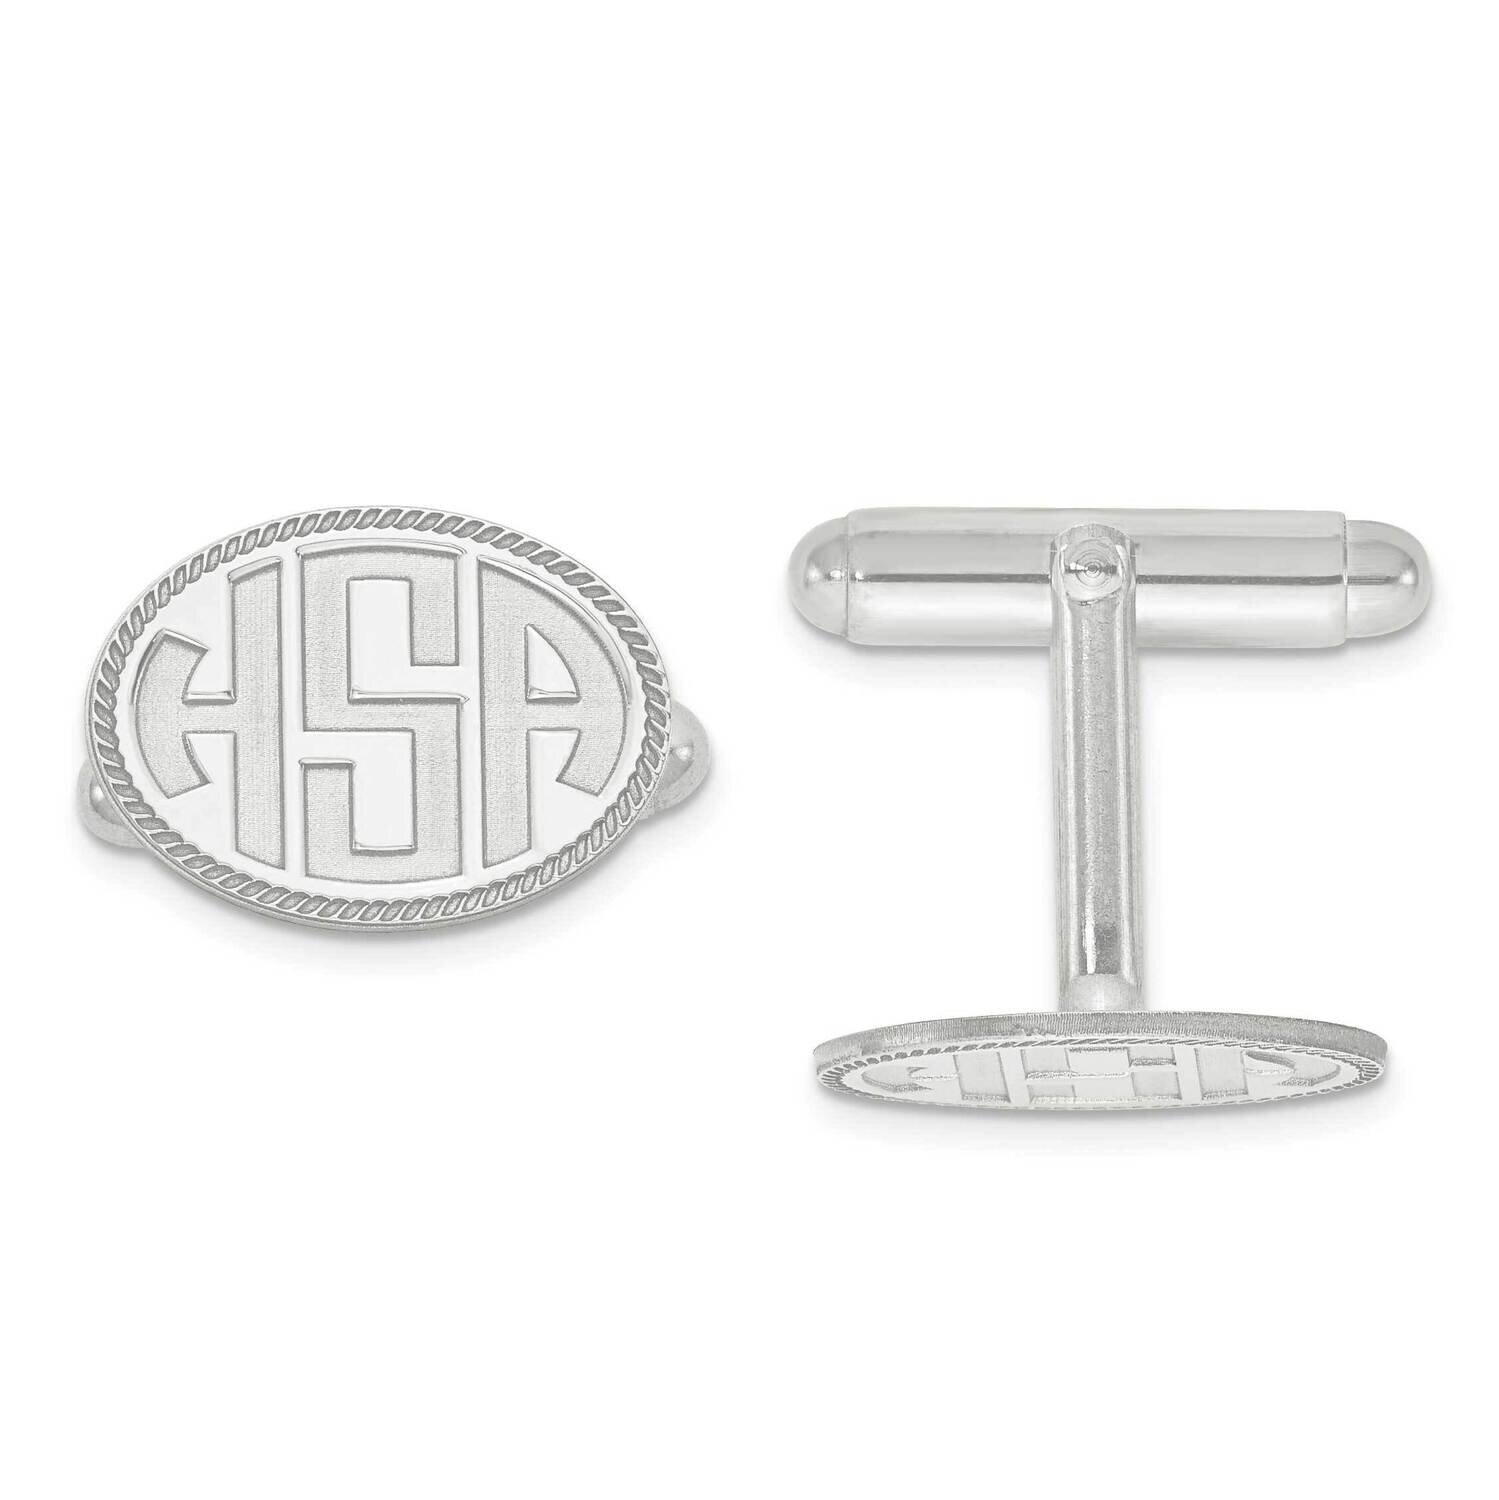 Recessed Letters Oval Border Monogram Cuff Links 14k White Gold XNA624W